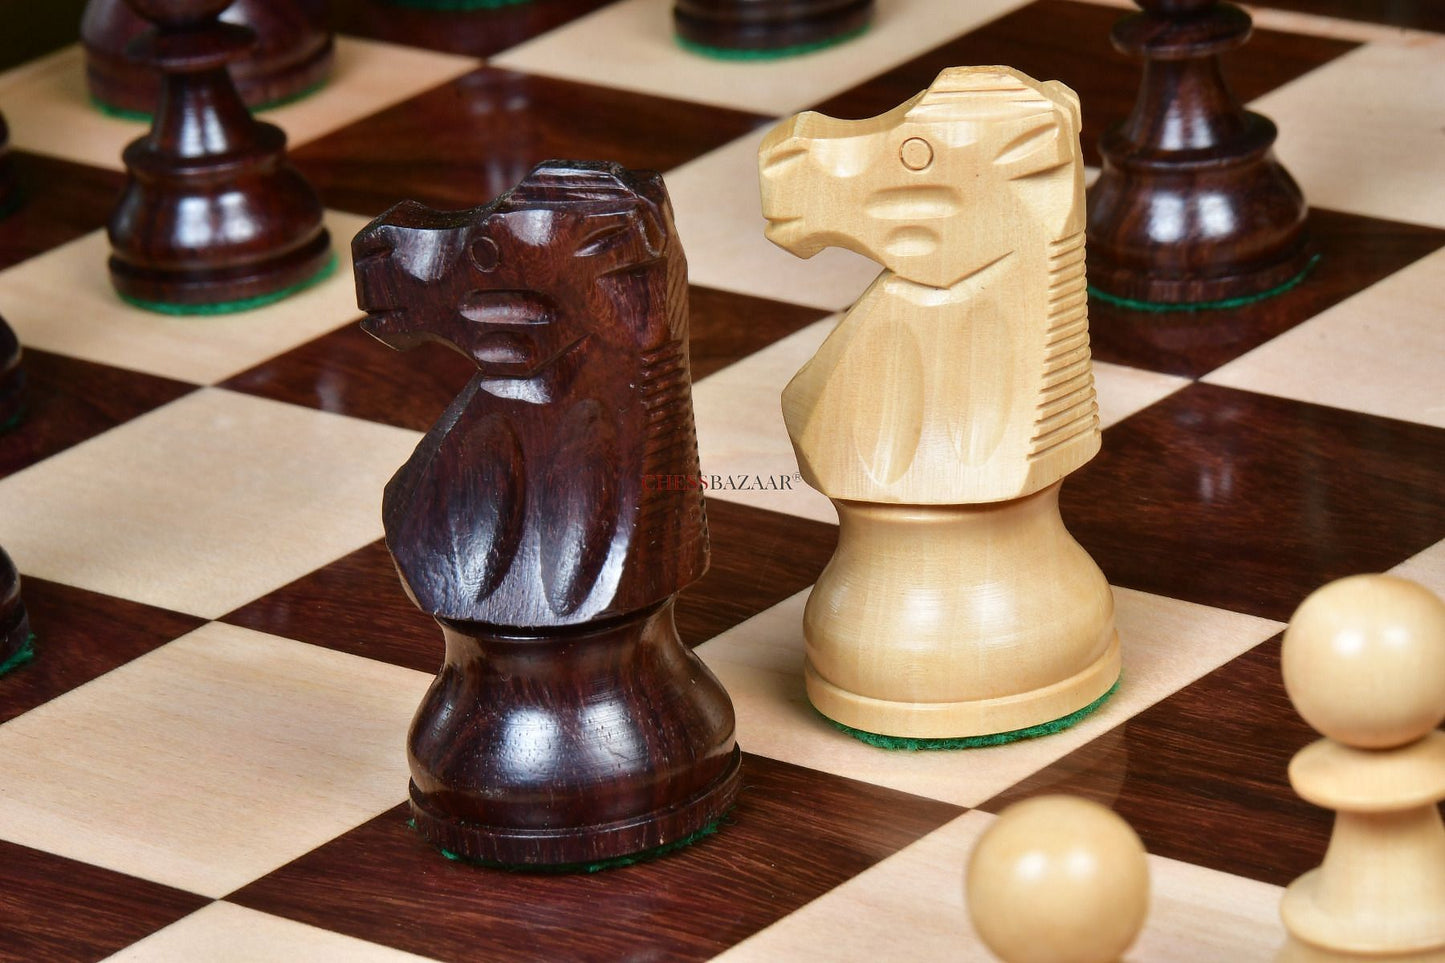 Reproduced French Lardy Exclusive Tournament Size Weighted Wooden Chess Pieces in Indian Rosewood / Box wood - 3.75"